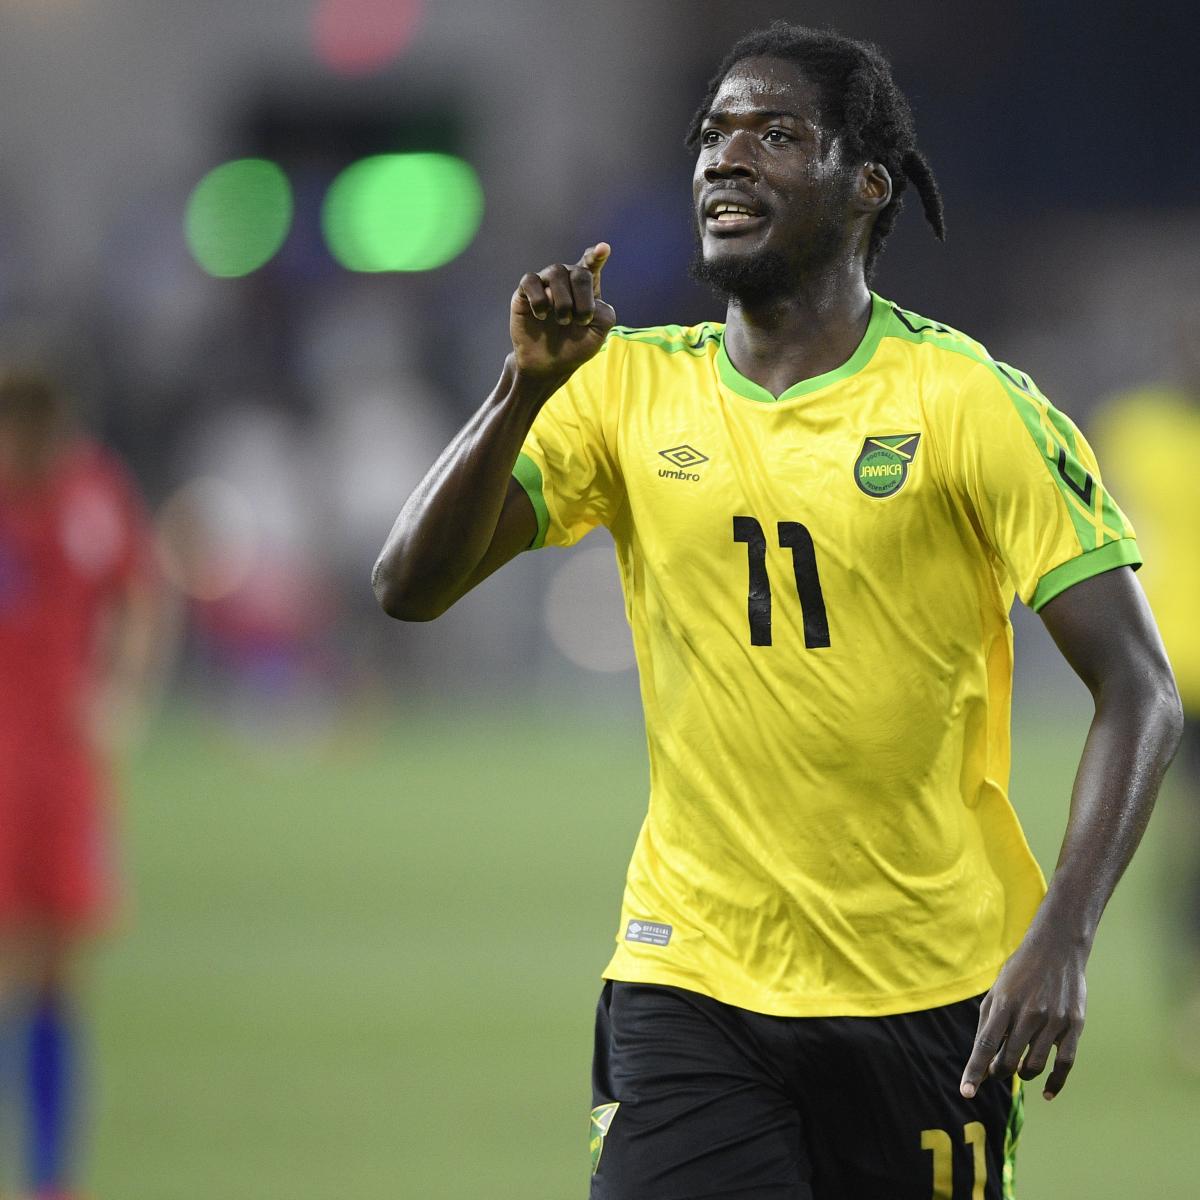 Chamblee soccer star played with Jamaican national team - The Champion  Newspaper, 404-373-7779